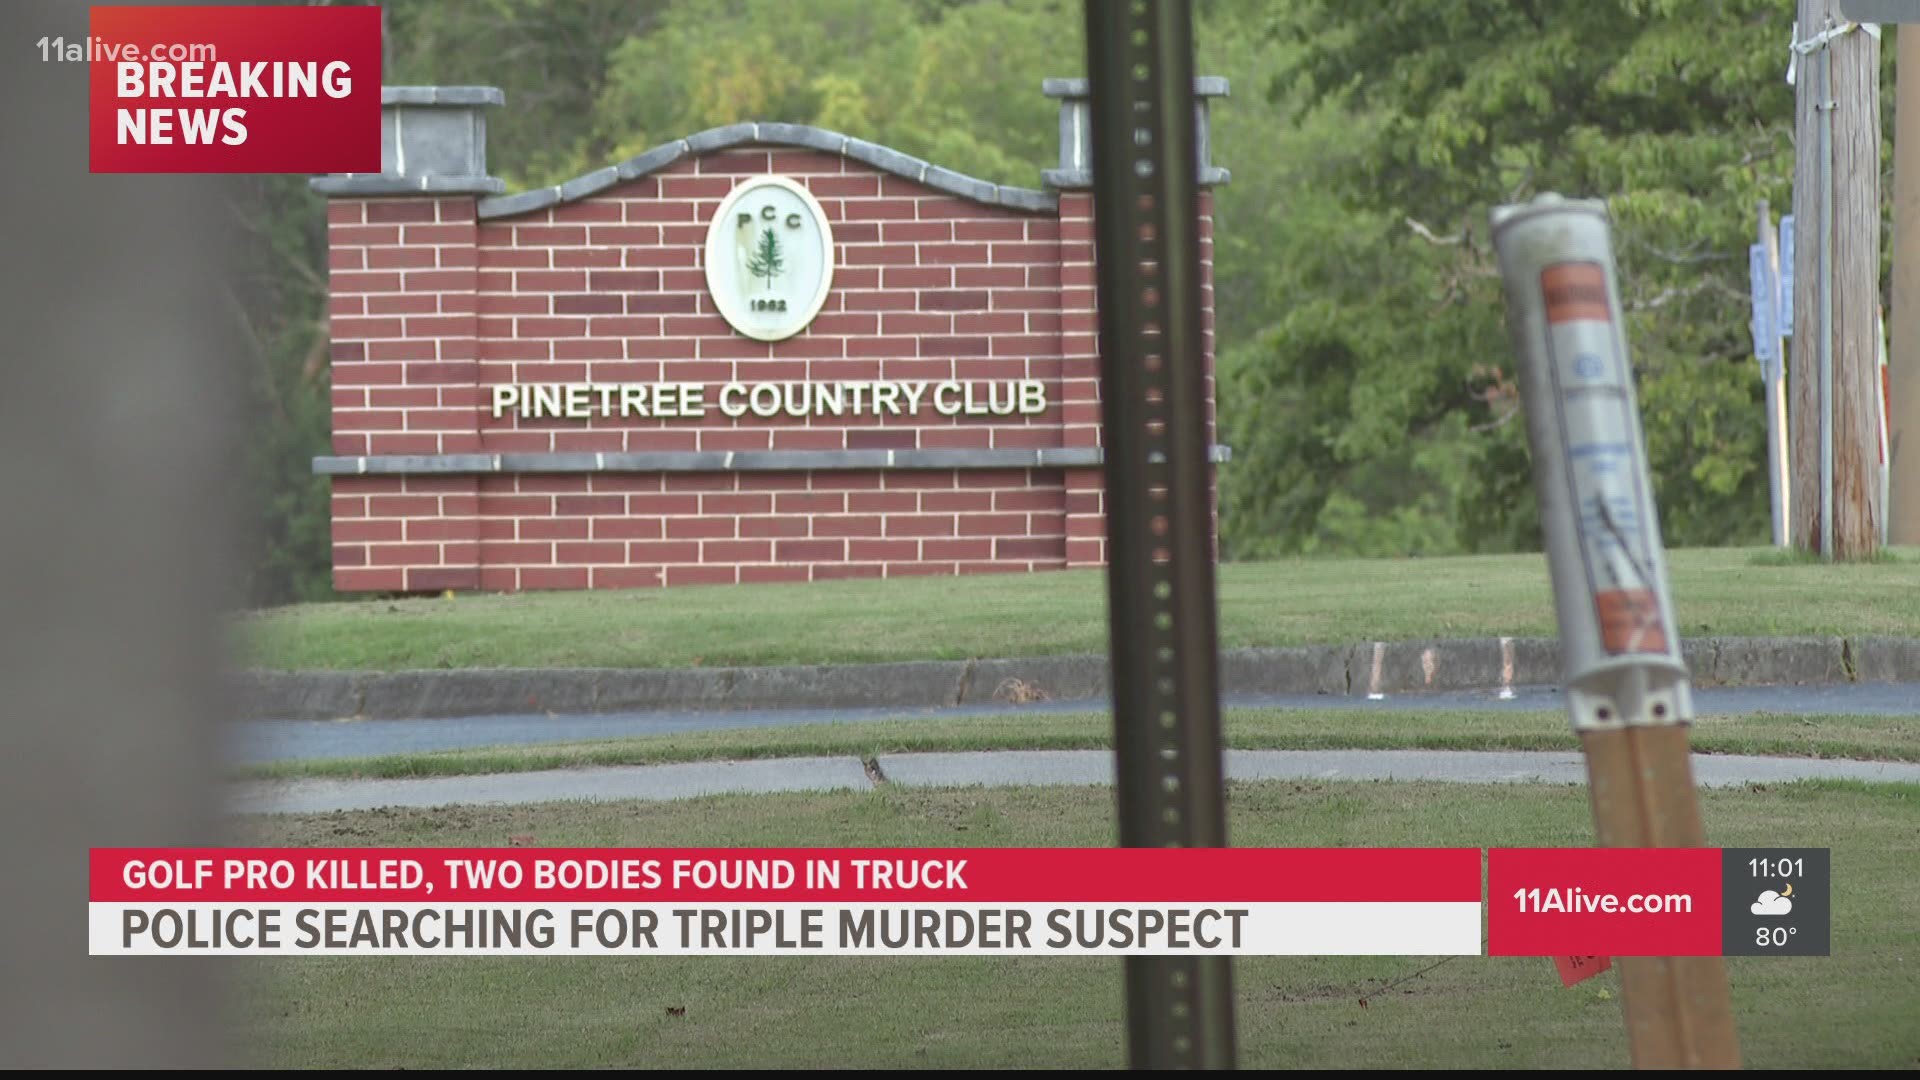 The bodies of two additional victims have been found after a shooting at the Pinetree Country Club that took the life of golf pro and director Gene Siller.